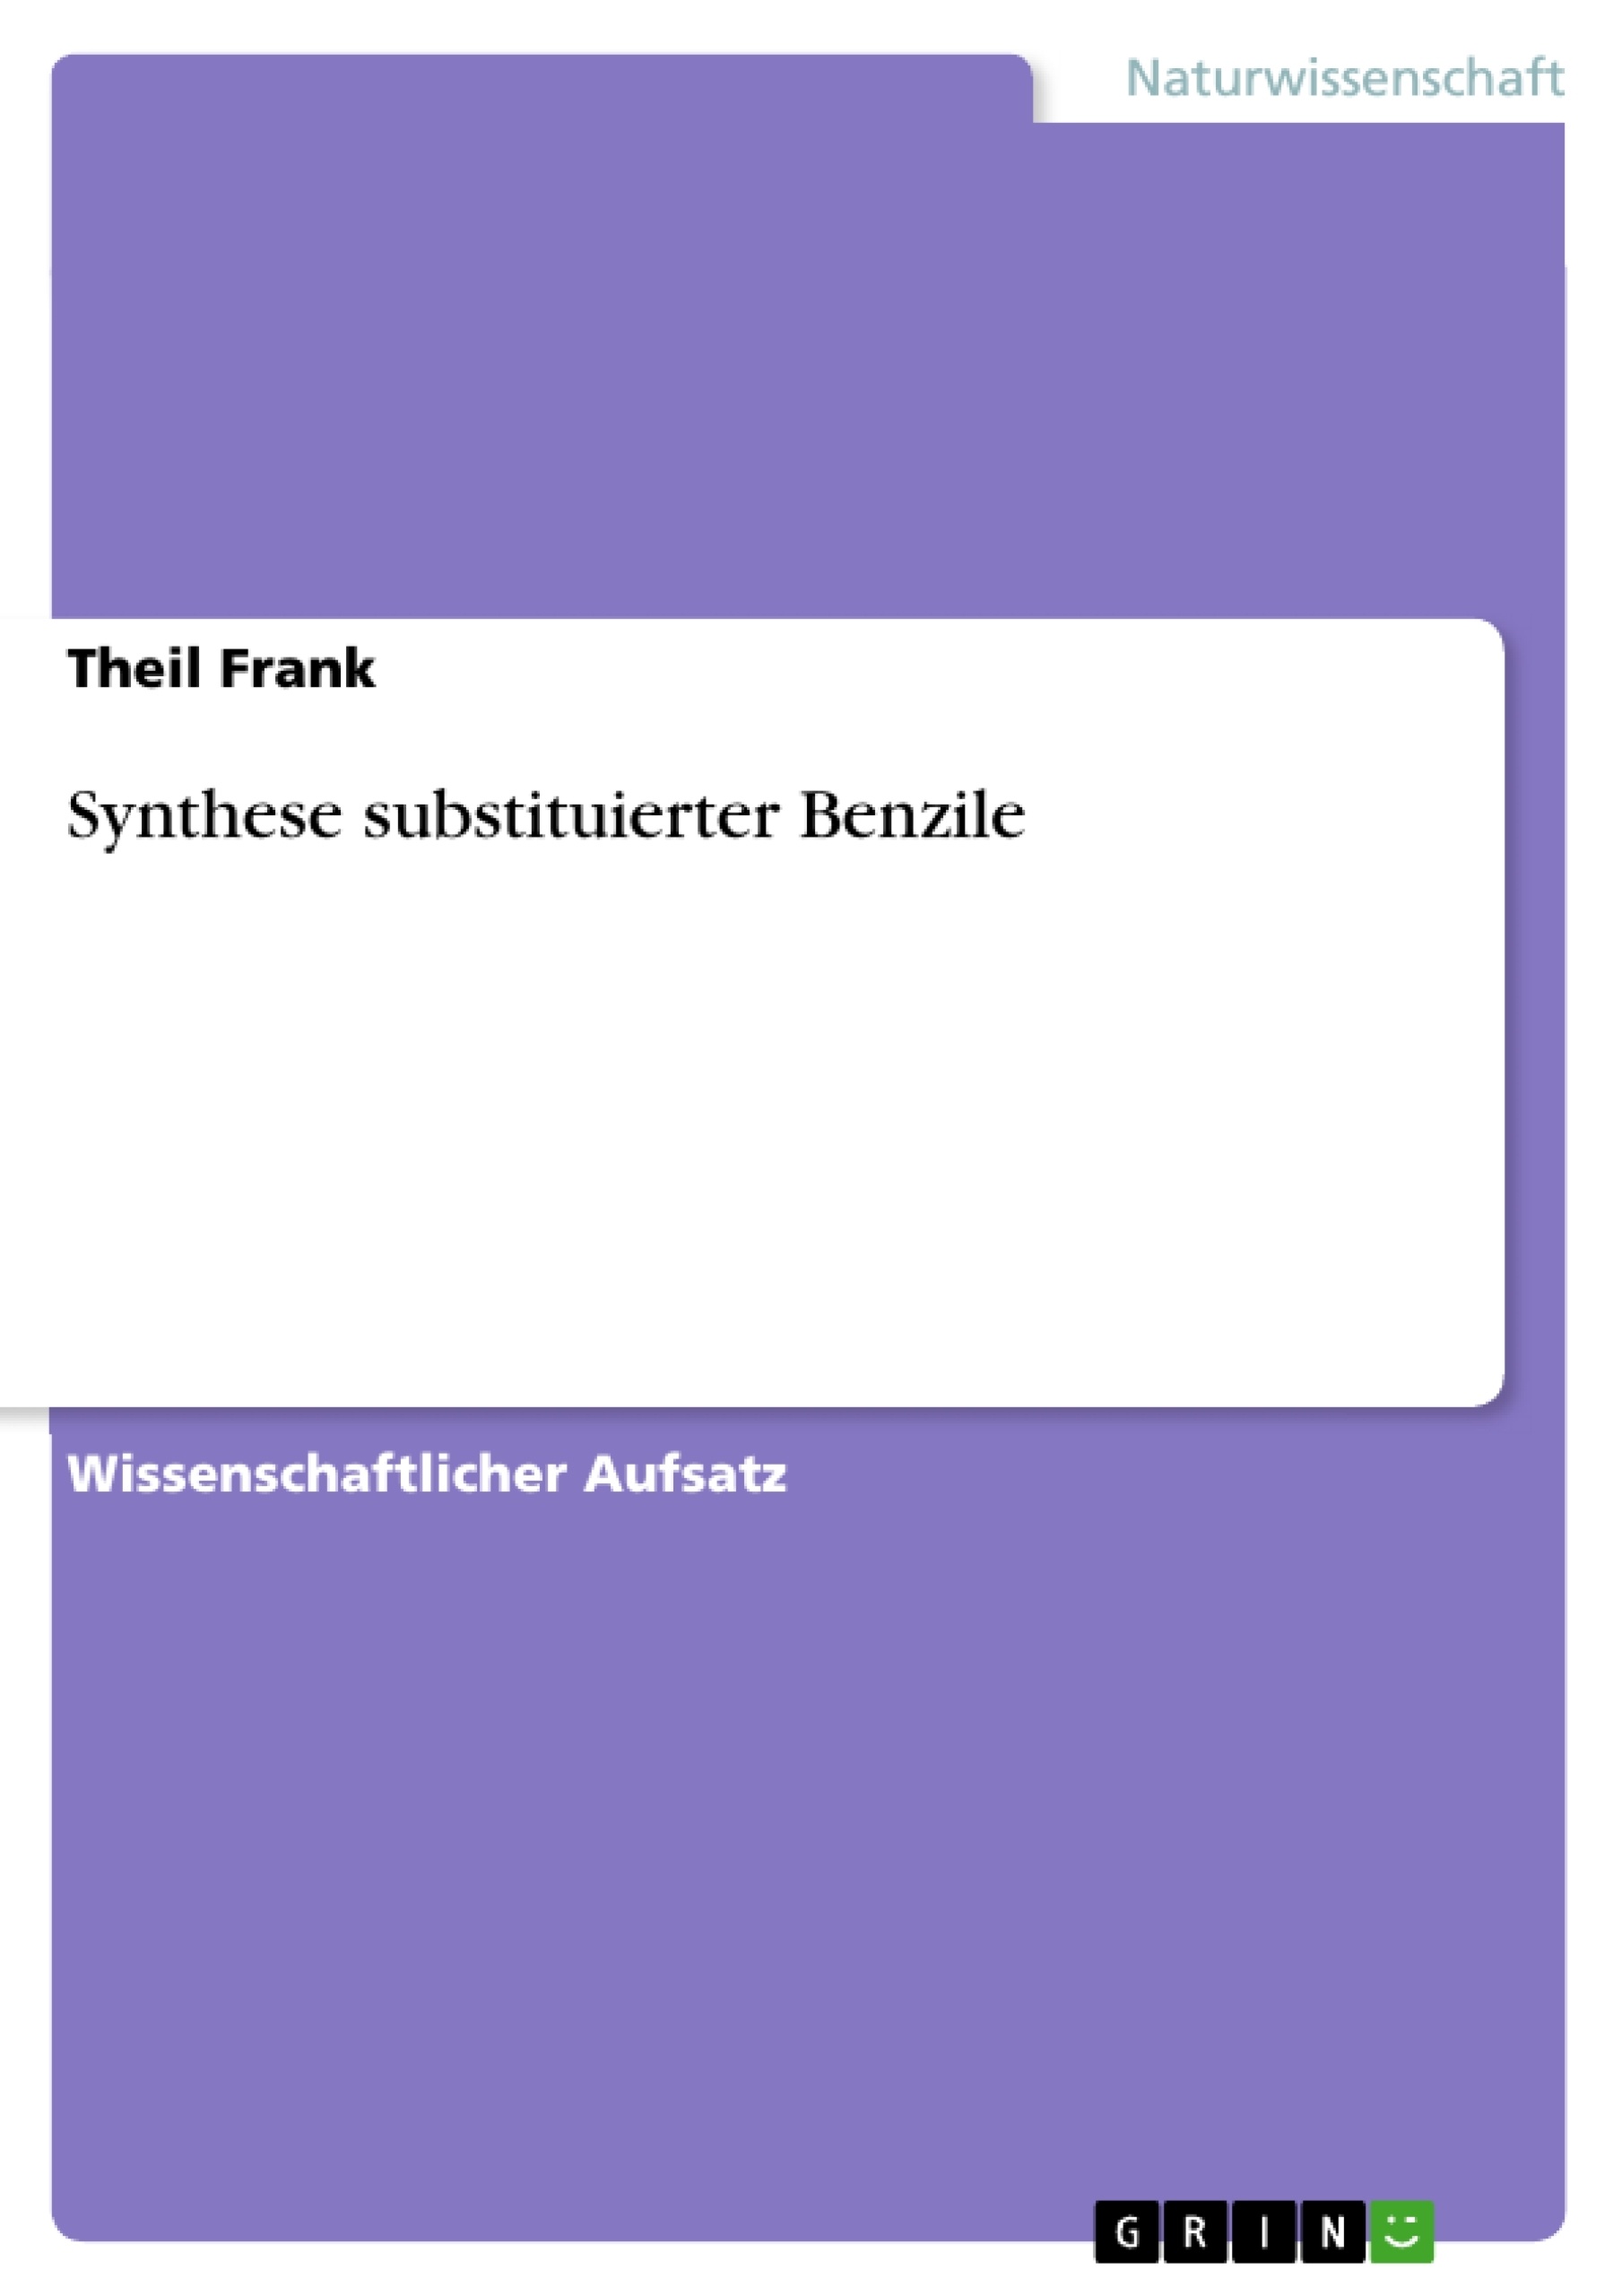 Título: Synthese substituierter Benzile